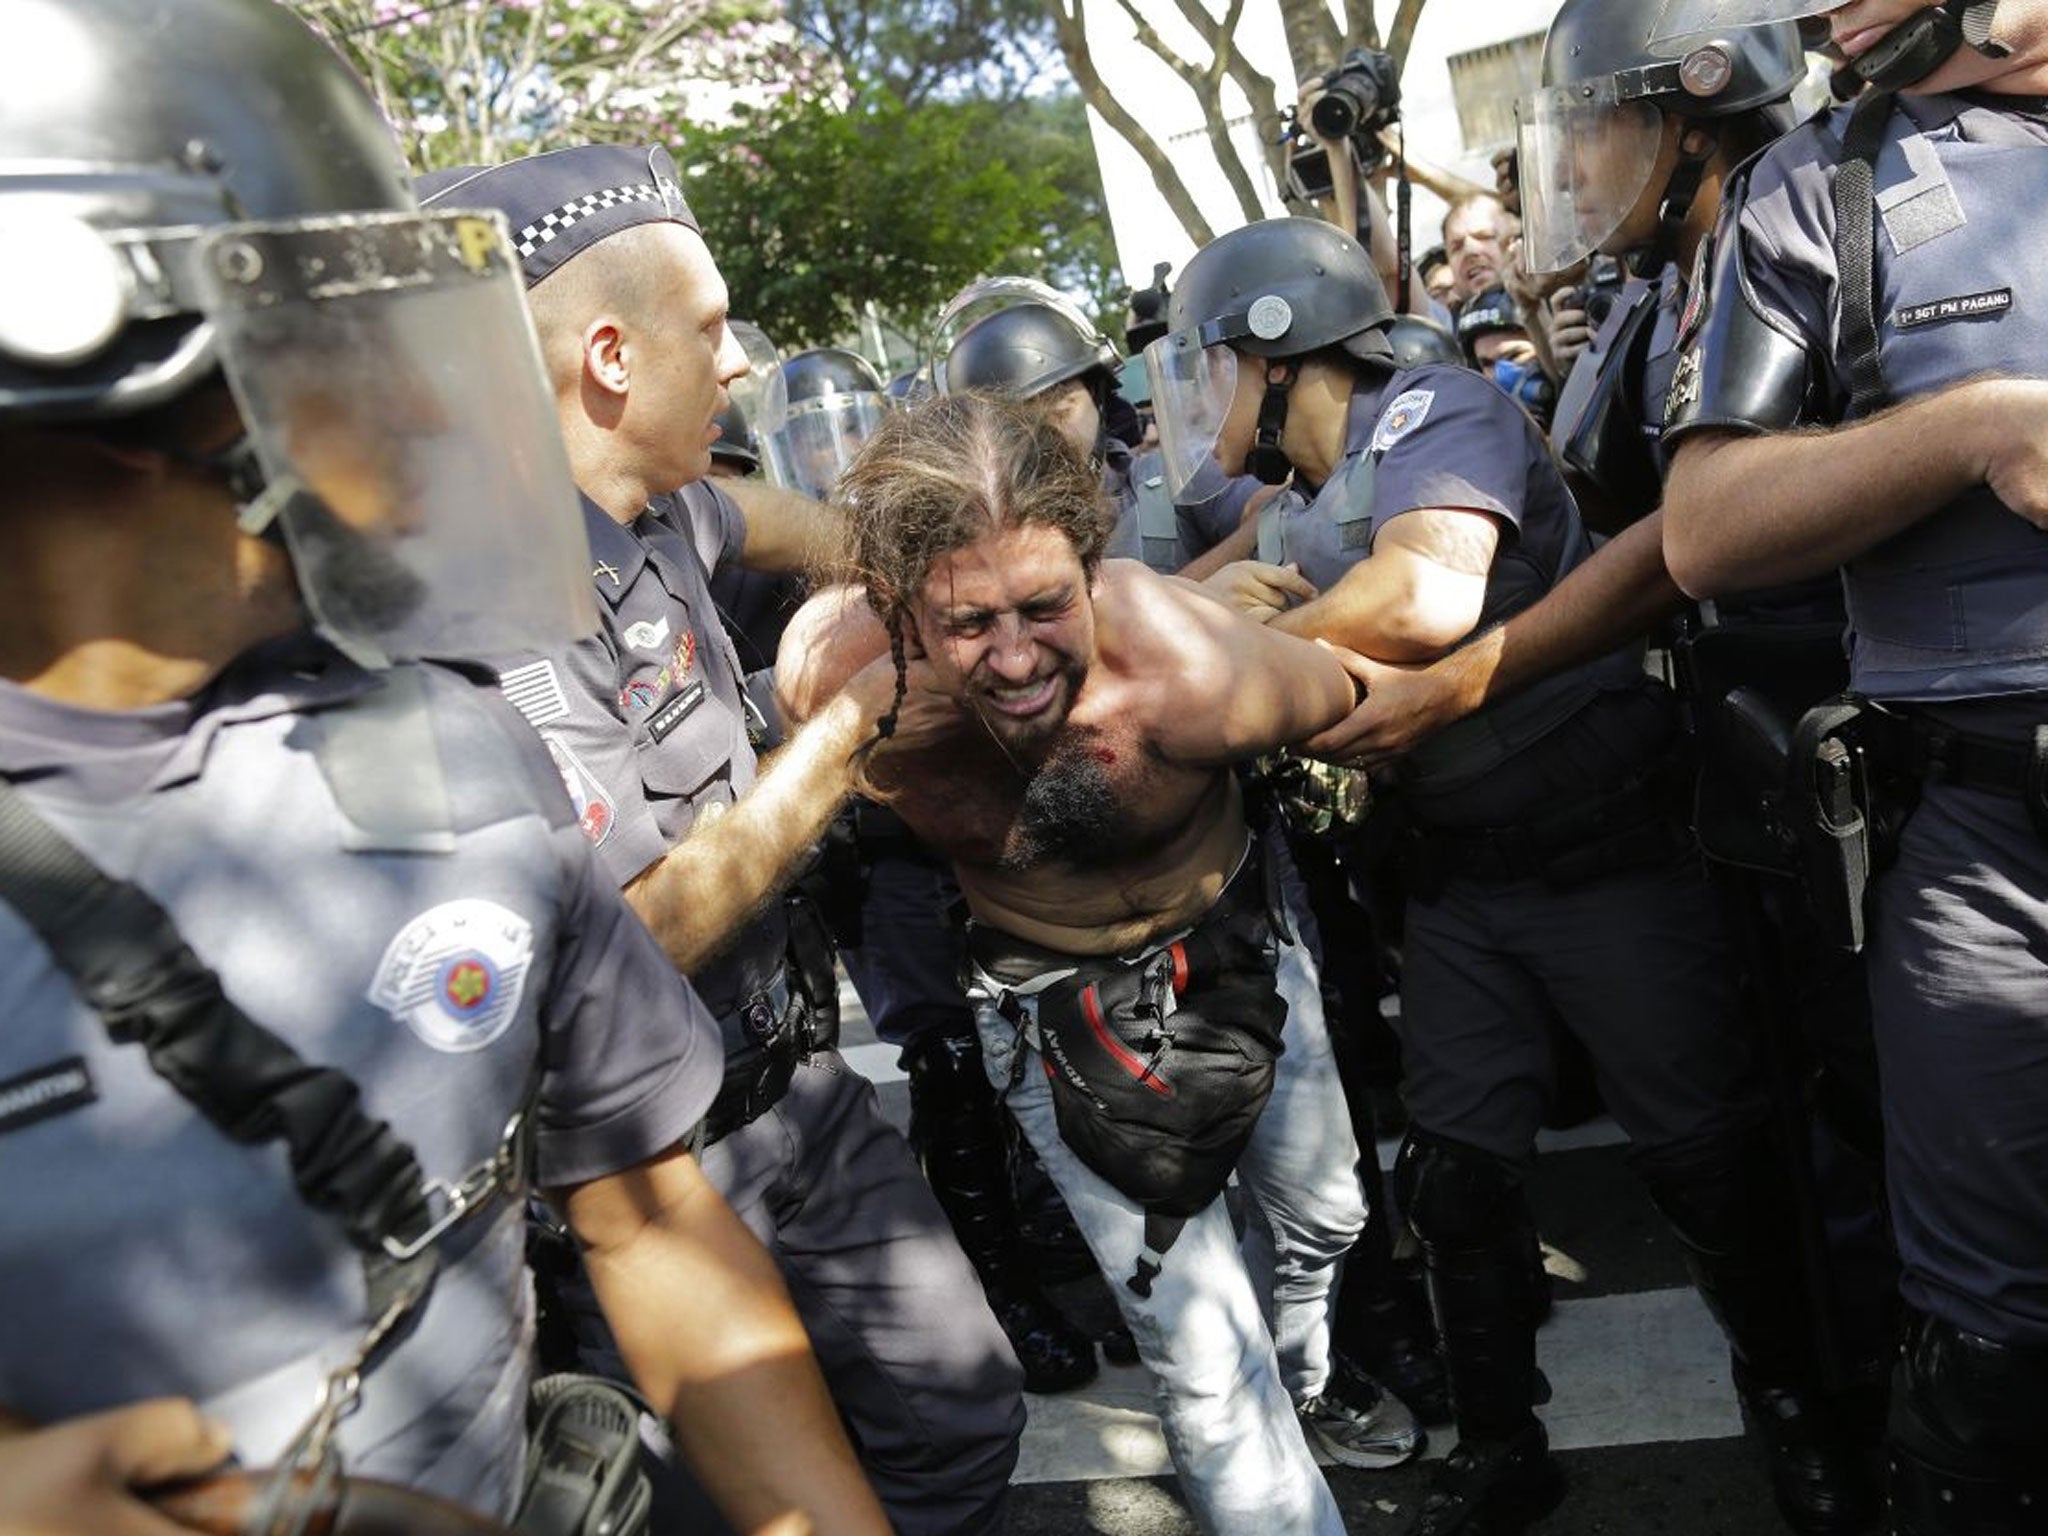 A protester is detained by police during a demonstration by people demanding better public services and against the money spent on the World Cup soccer tournament in Sao Paulo, Brazil, Thursday, June 12, 2014. Brazilian police clashed with anti-World Cup